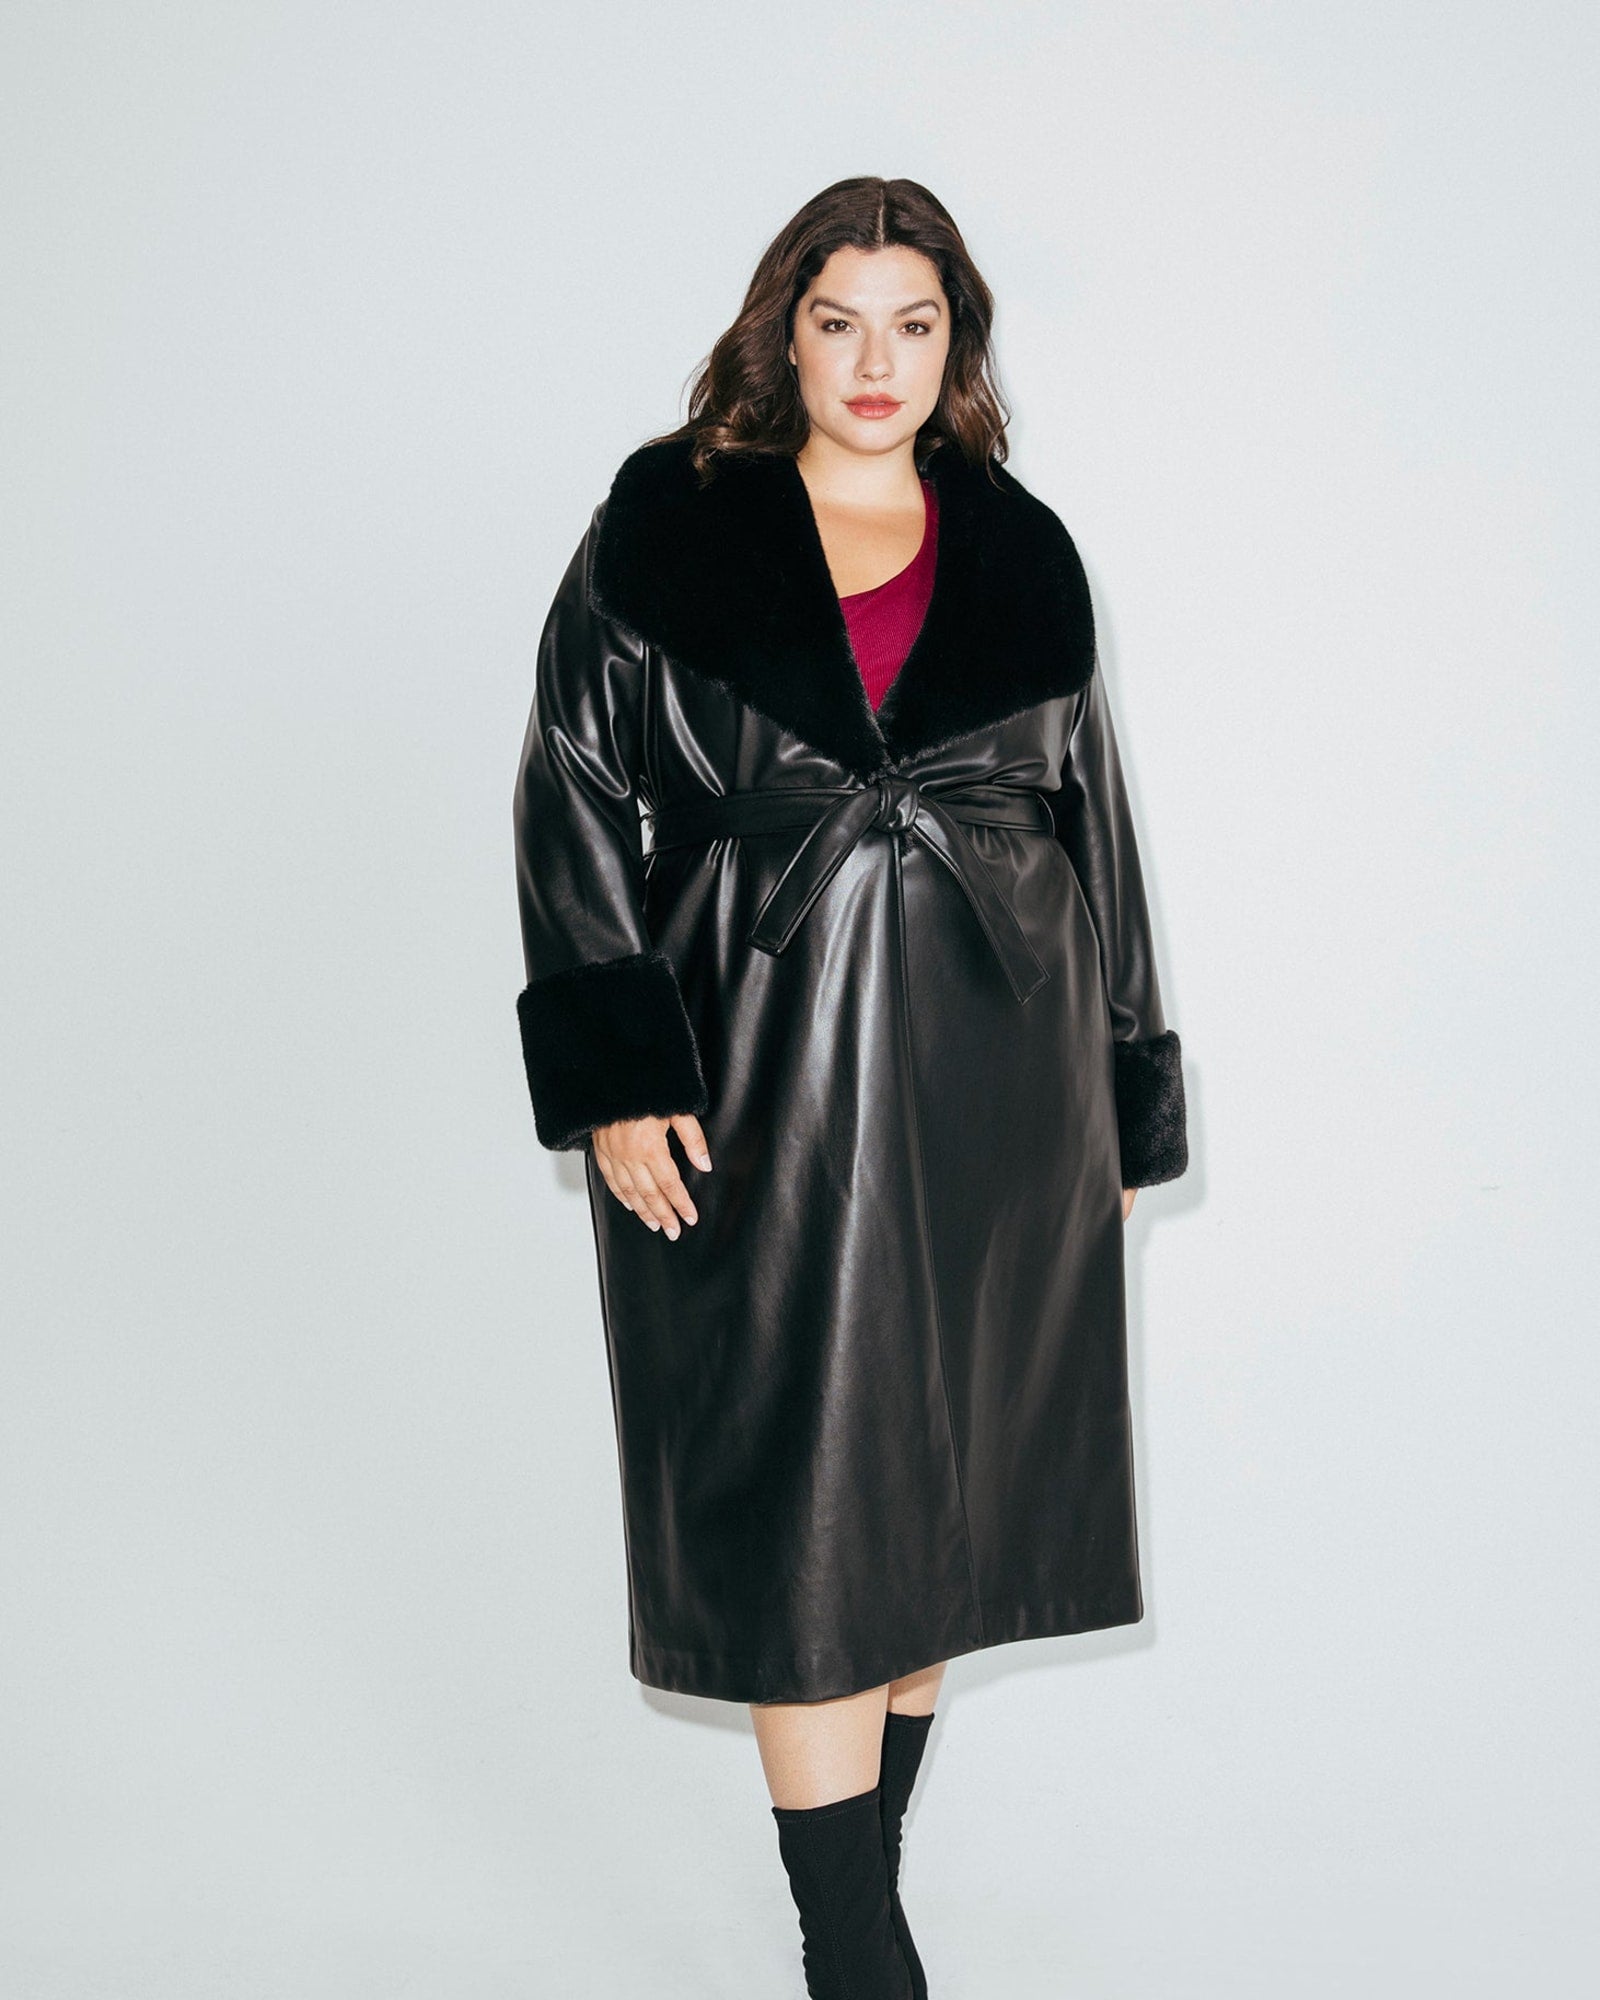 The Plus-Size Coat Round-Up You've Been Waiting For - Dia & Co